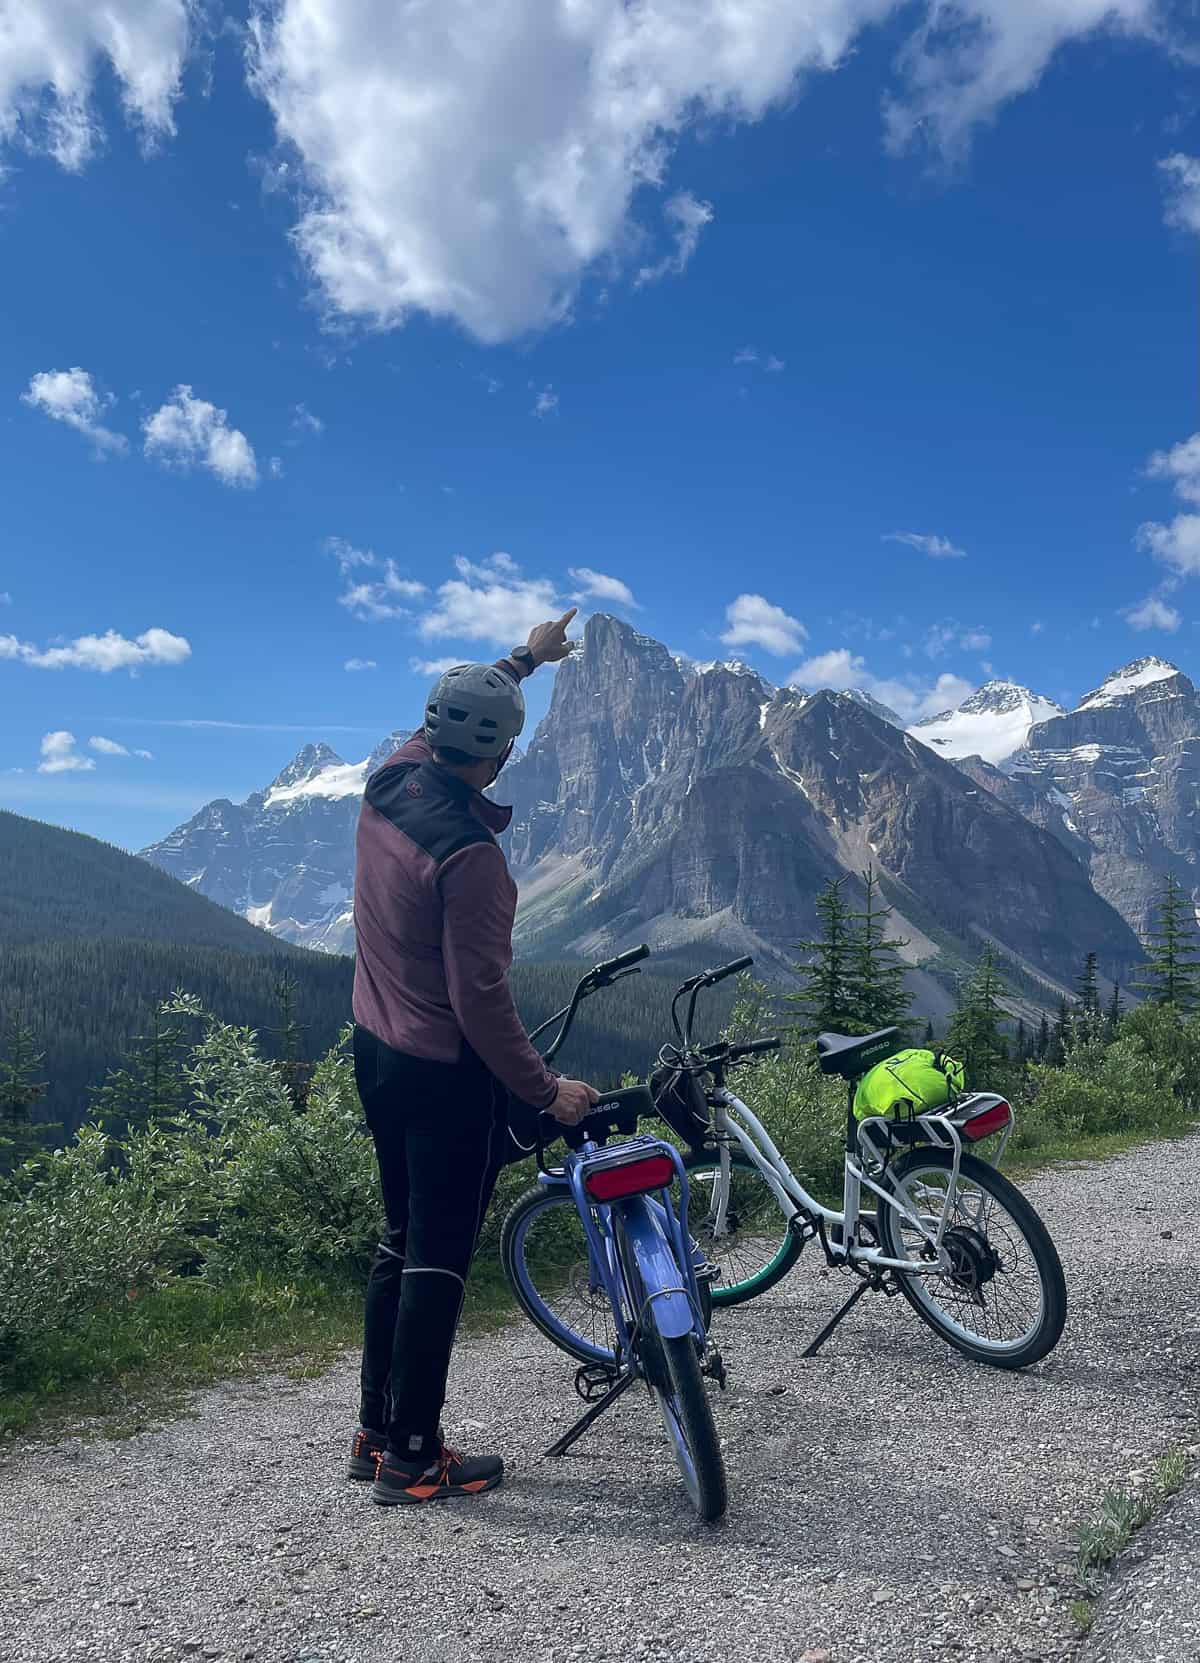 Mike pointing his finger to the top of a mountain beside our e-bikes.